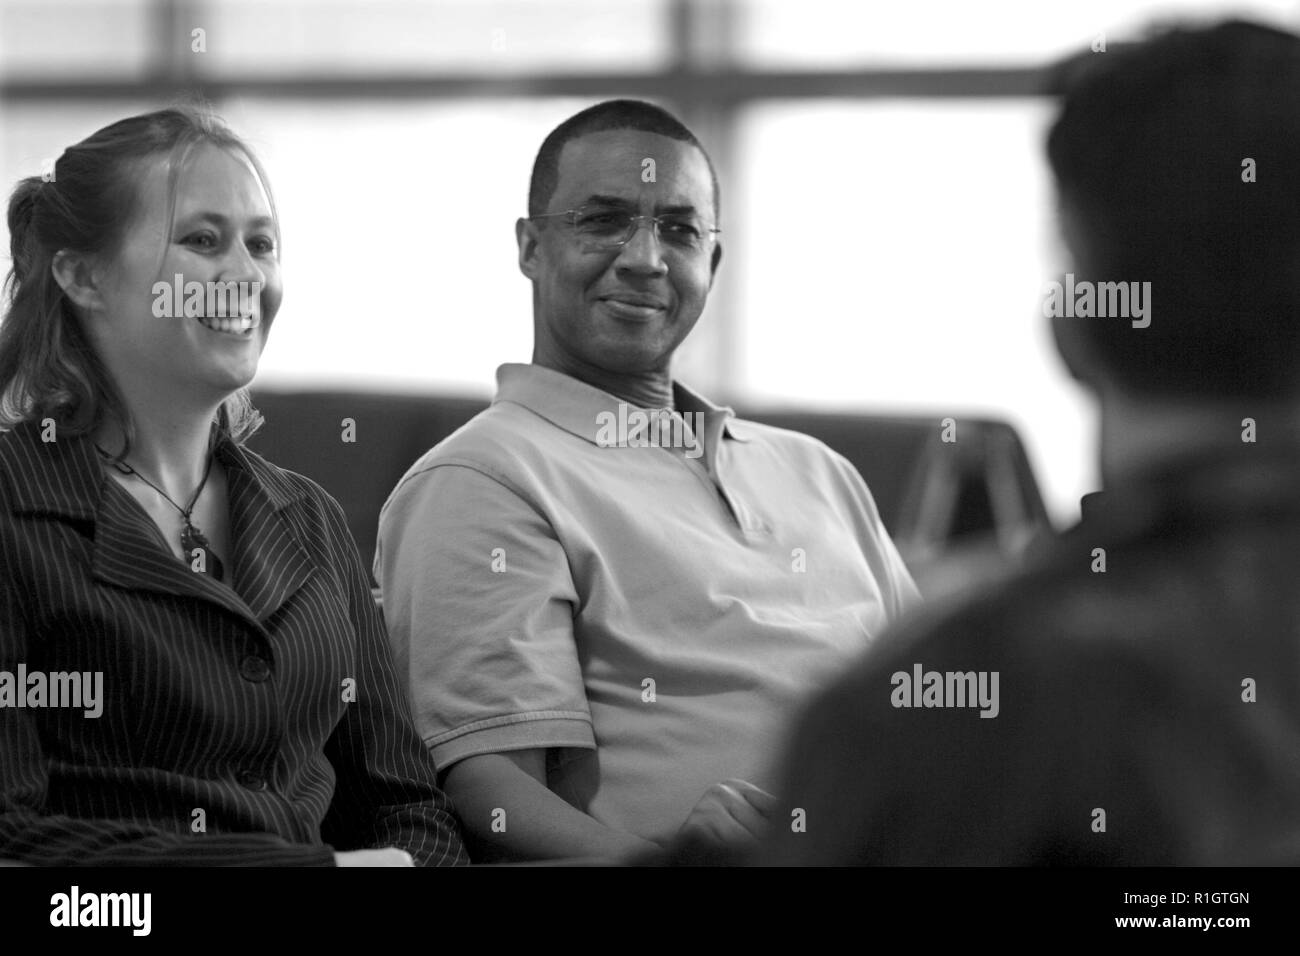 people sit and talk in an airport Stock Photo